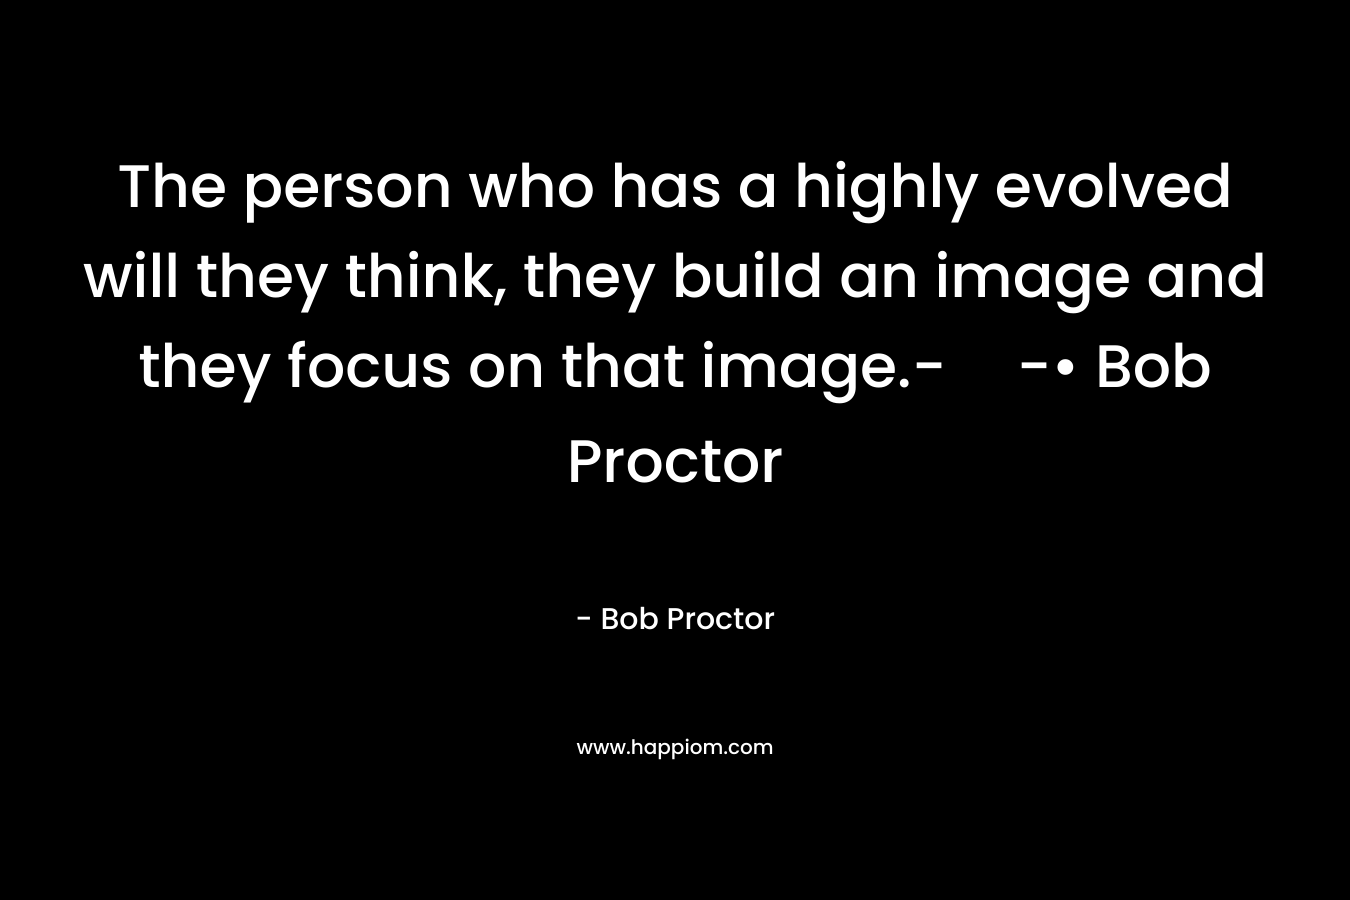 The person who has a highly evolved will they think, they build an image and they focus on that image.--• Bob Proctor